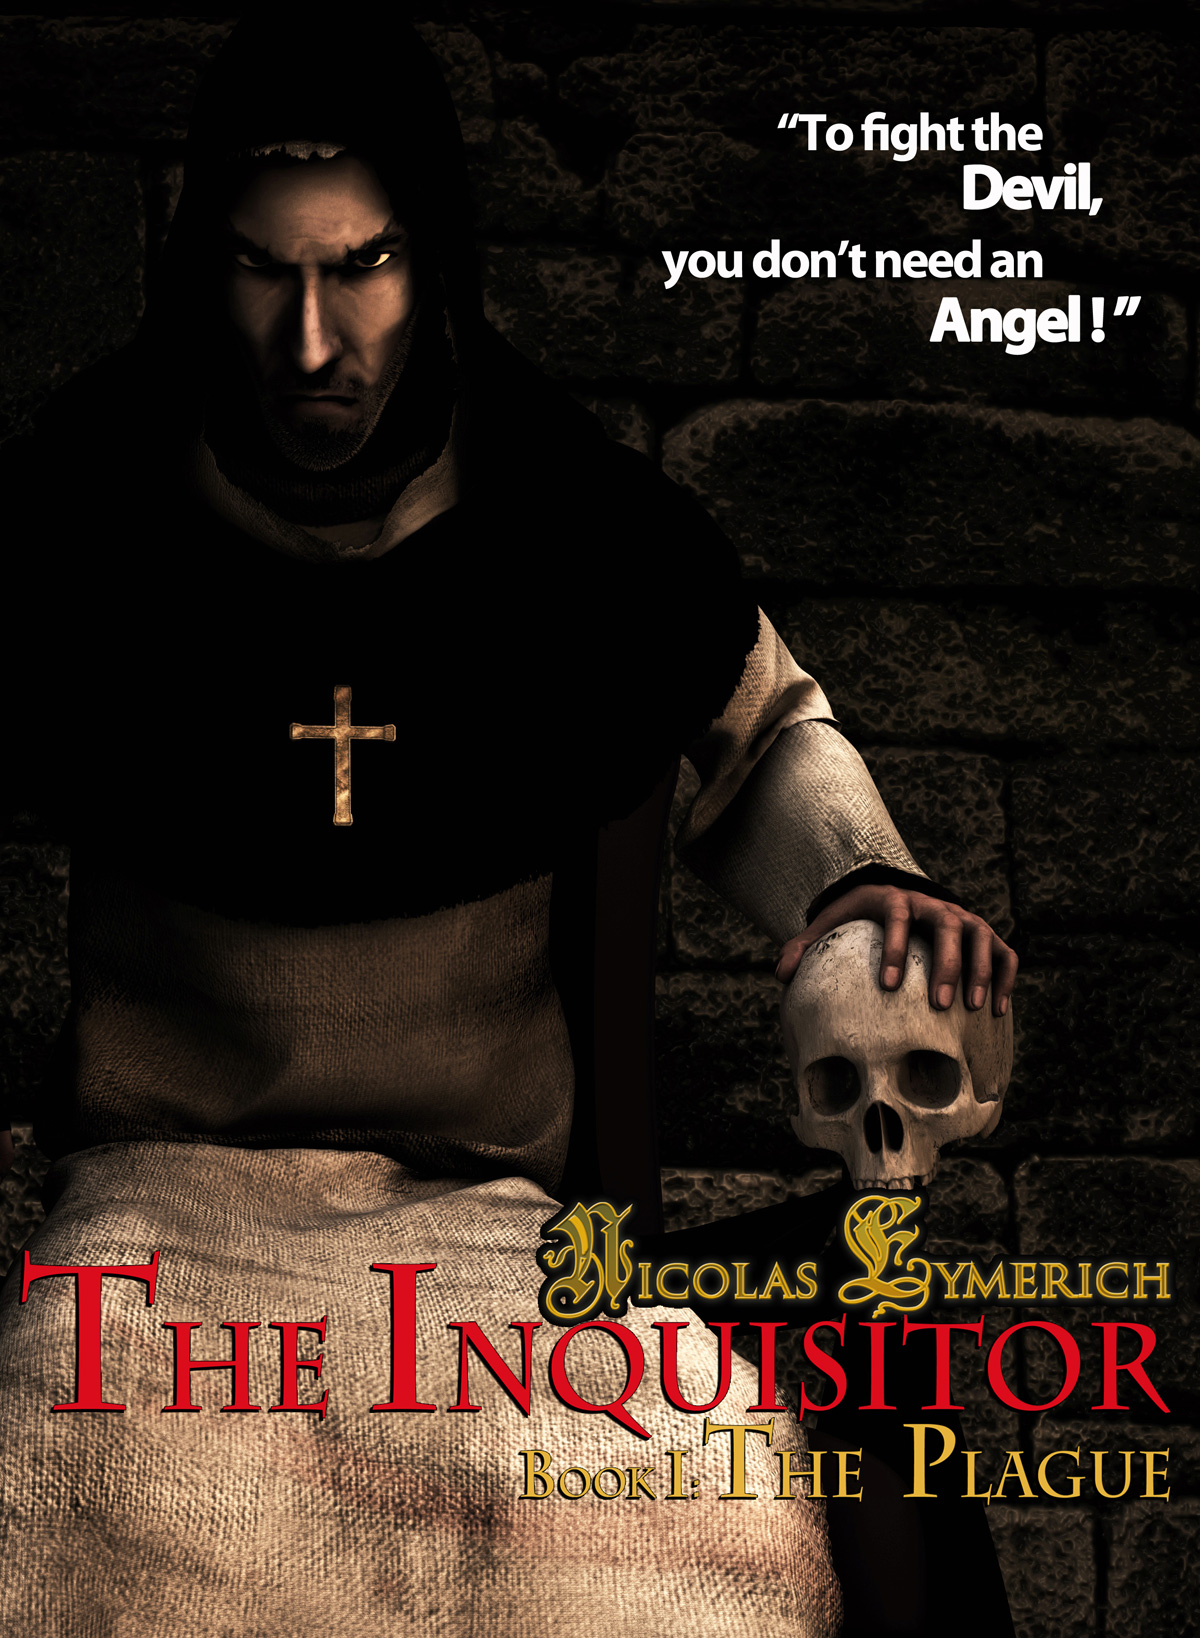 Microids The Inquisitor New Trailer and Details